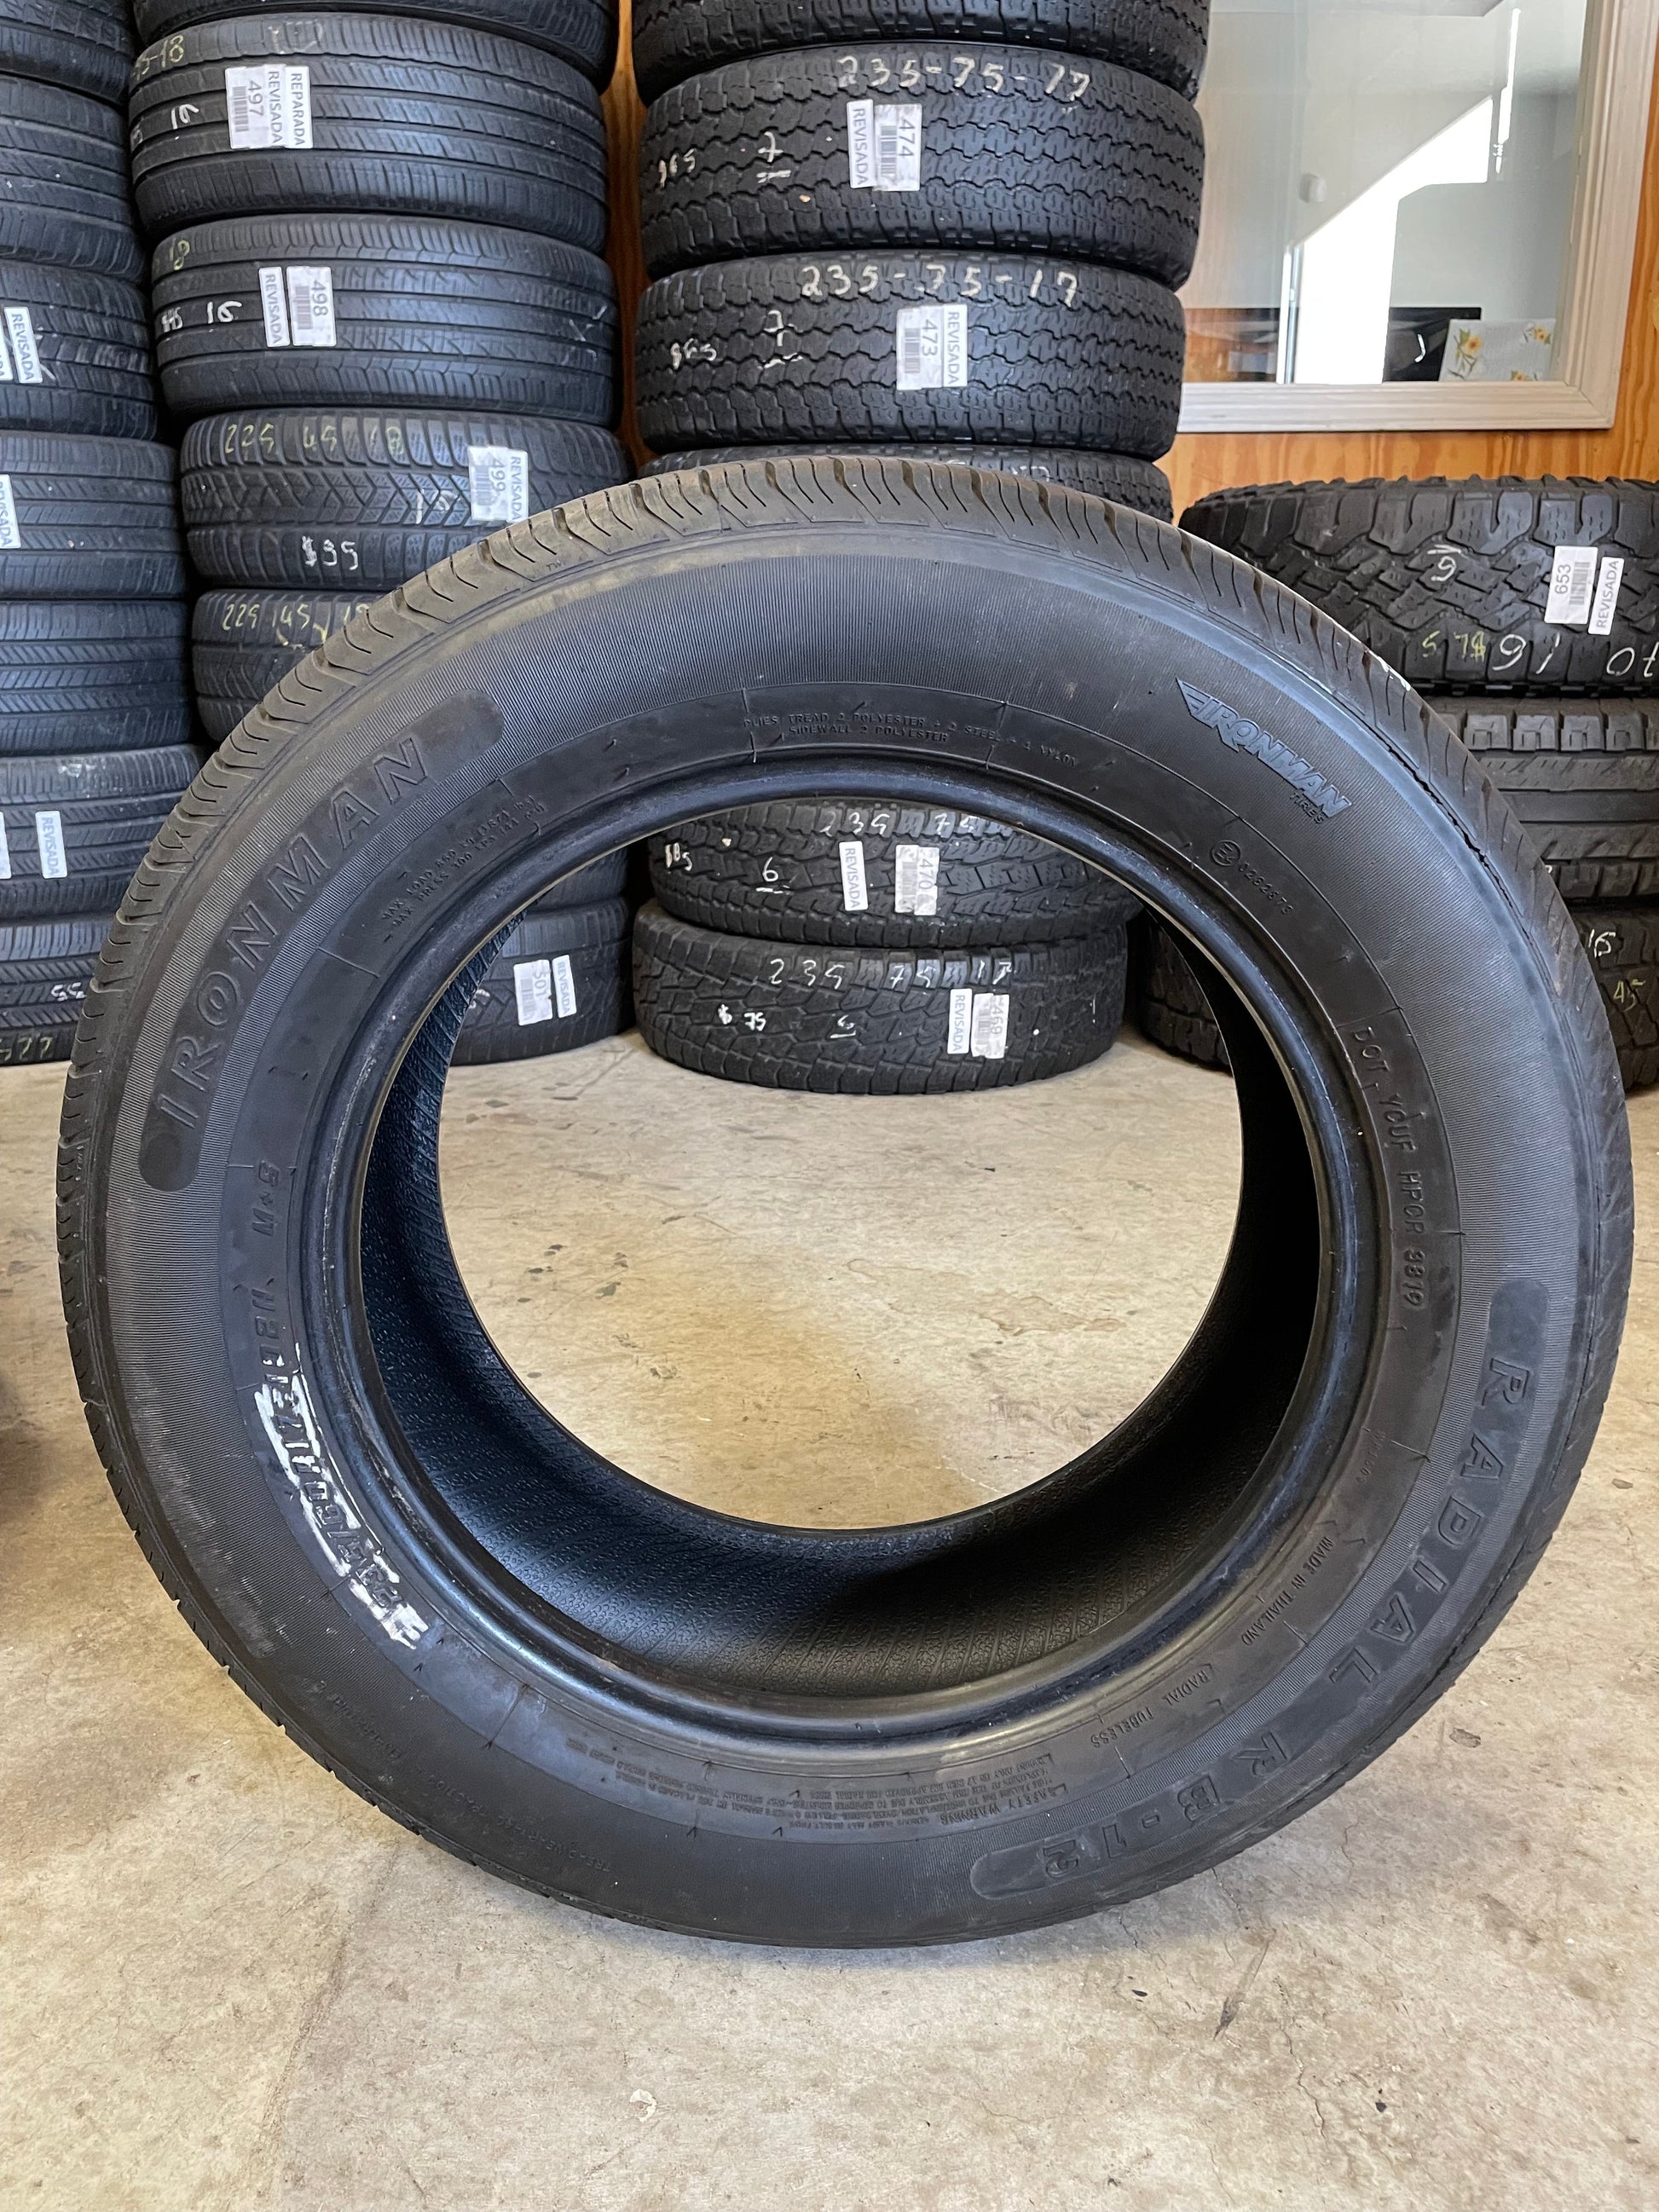 SINGLE 235/60R17 Ironman Radial RB-12 102 H SL - Used Tires